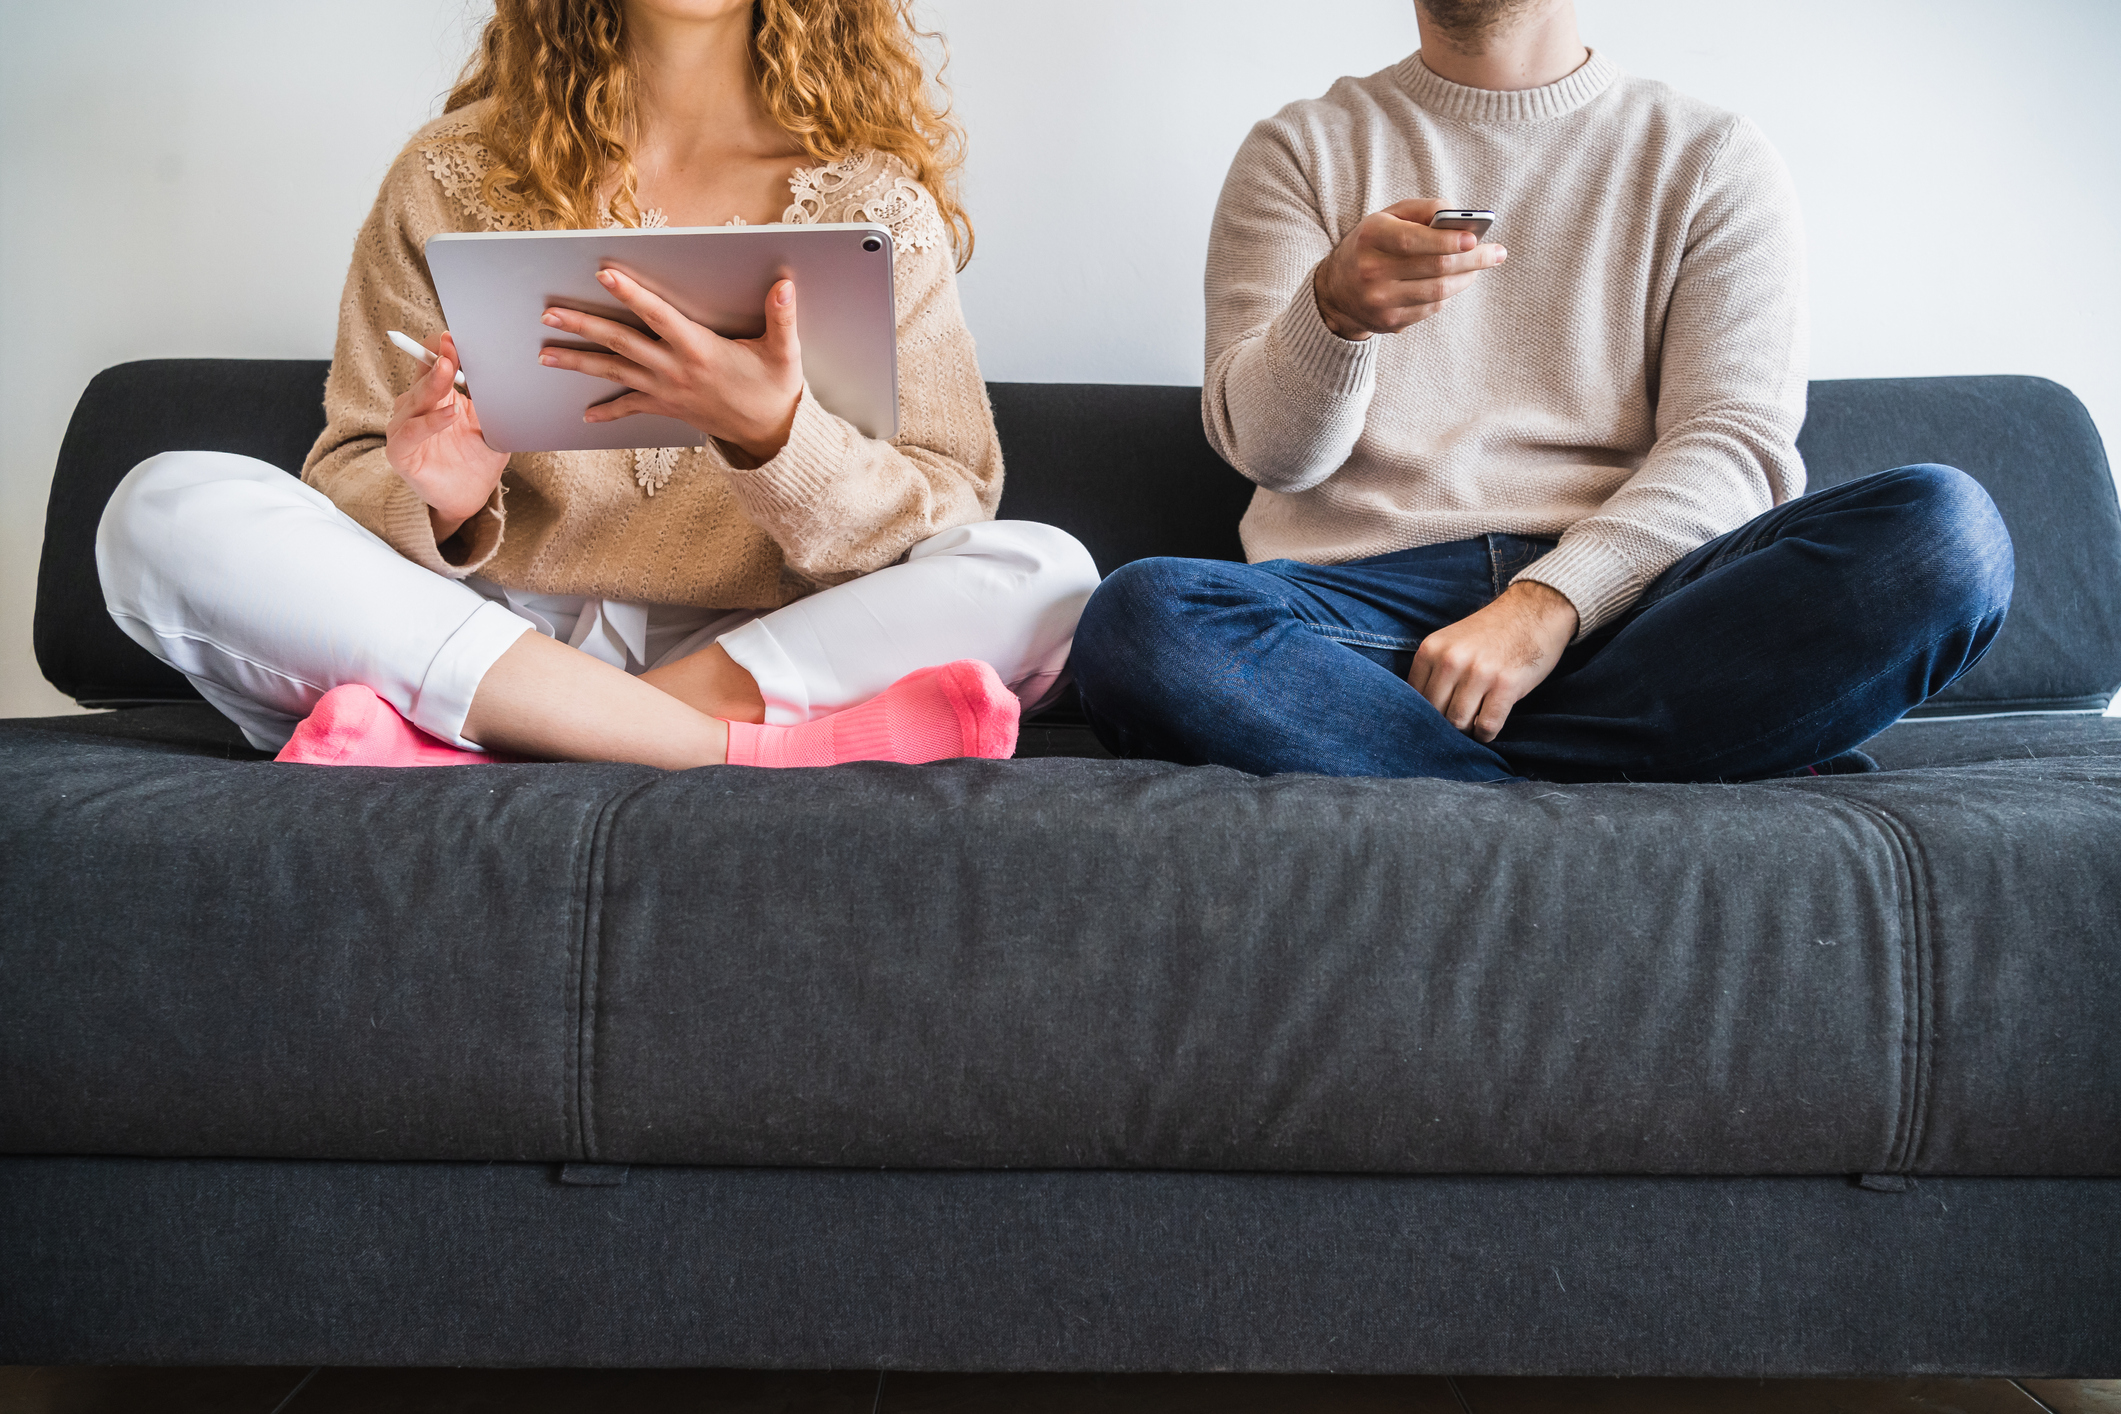 Crop couple resting on sofa using tablet and tv remote